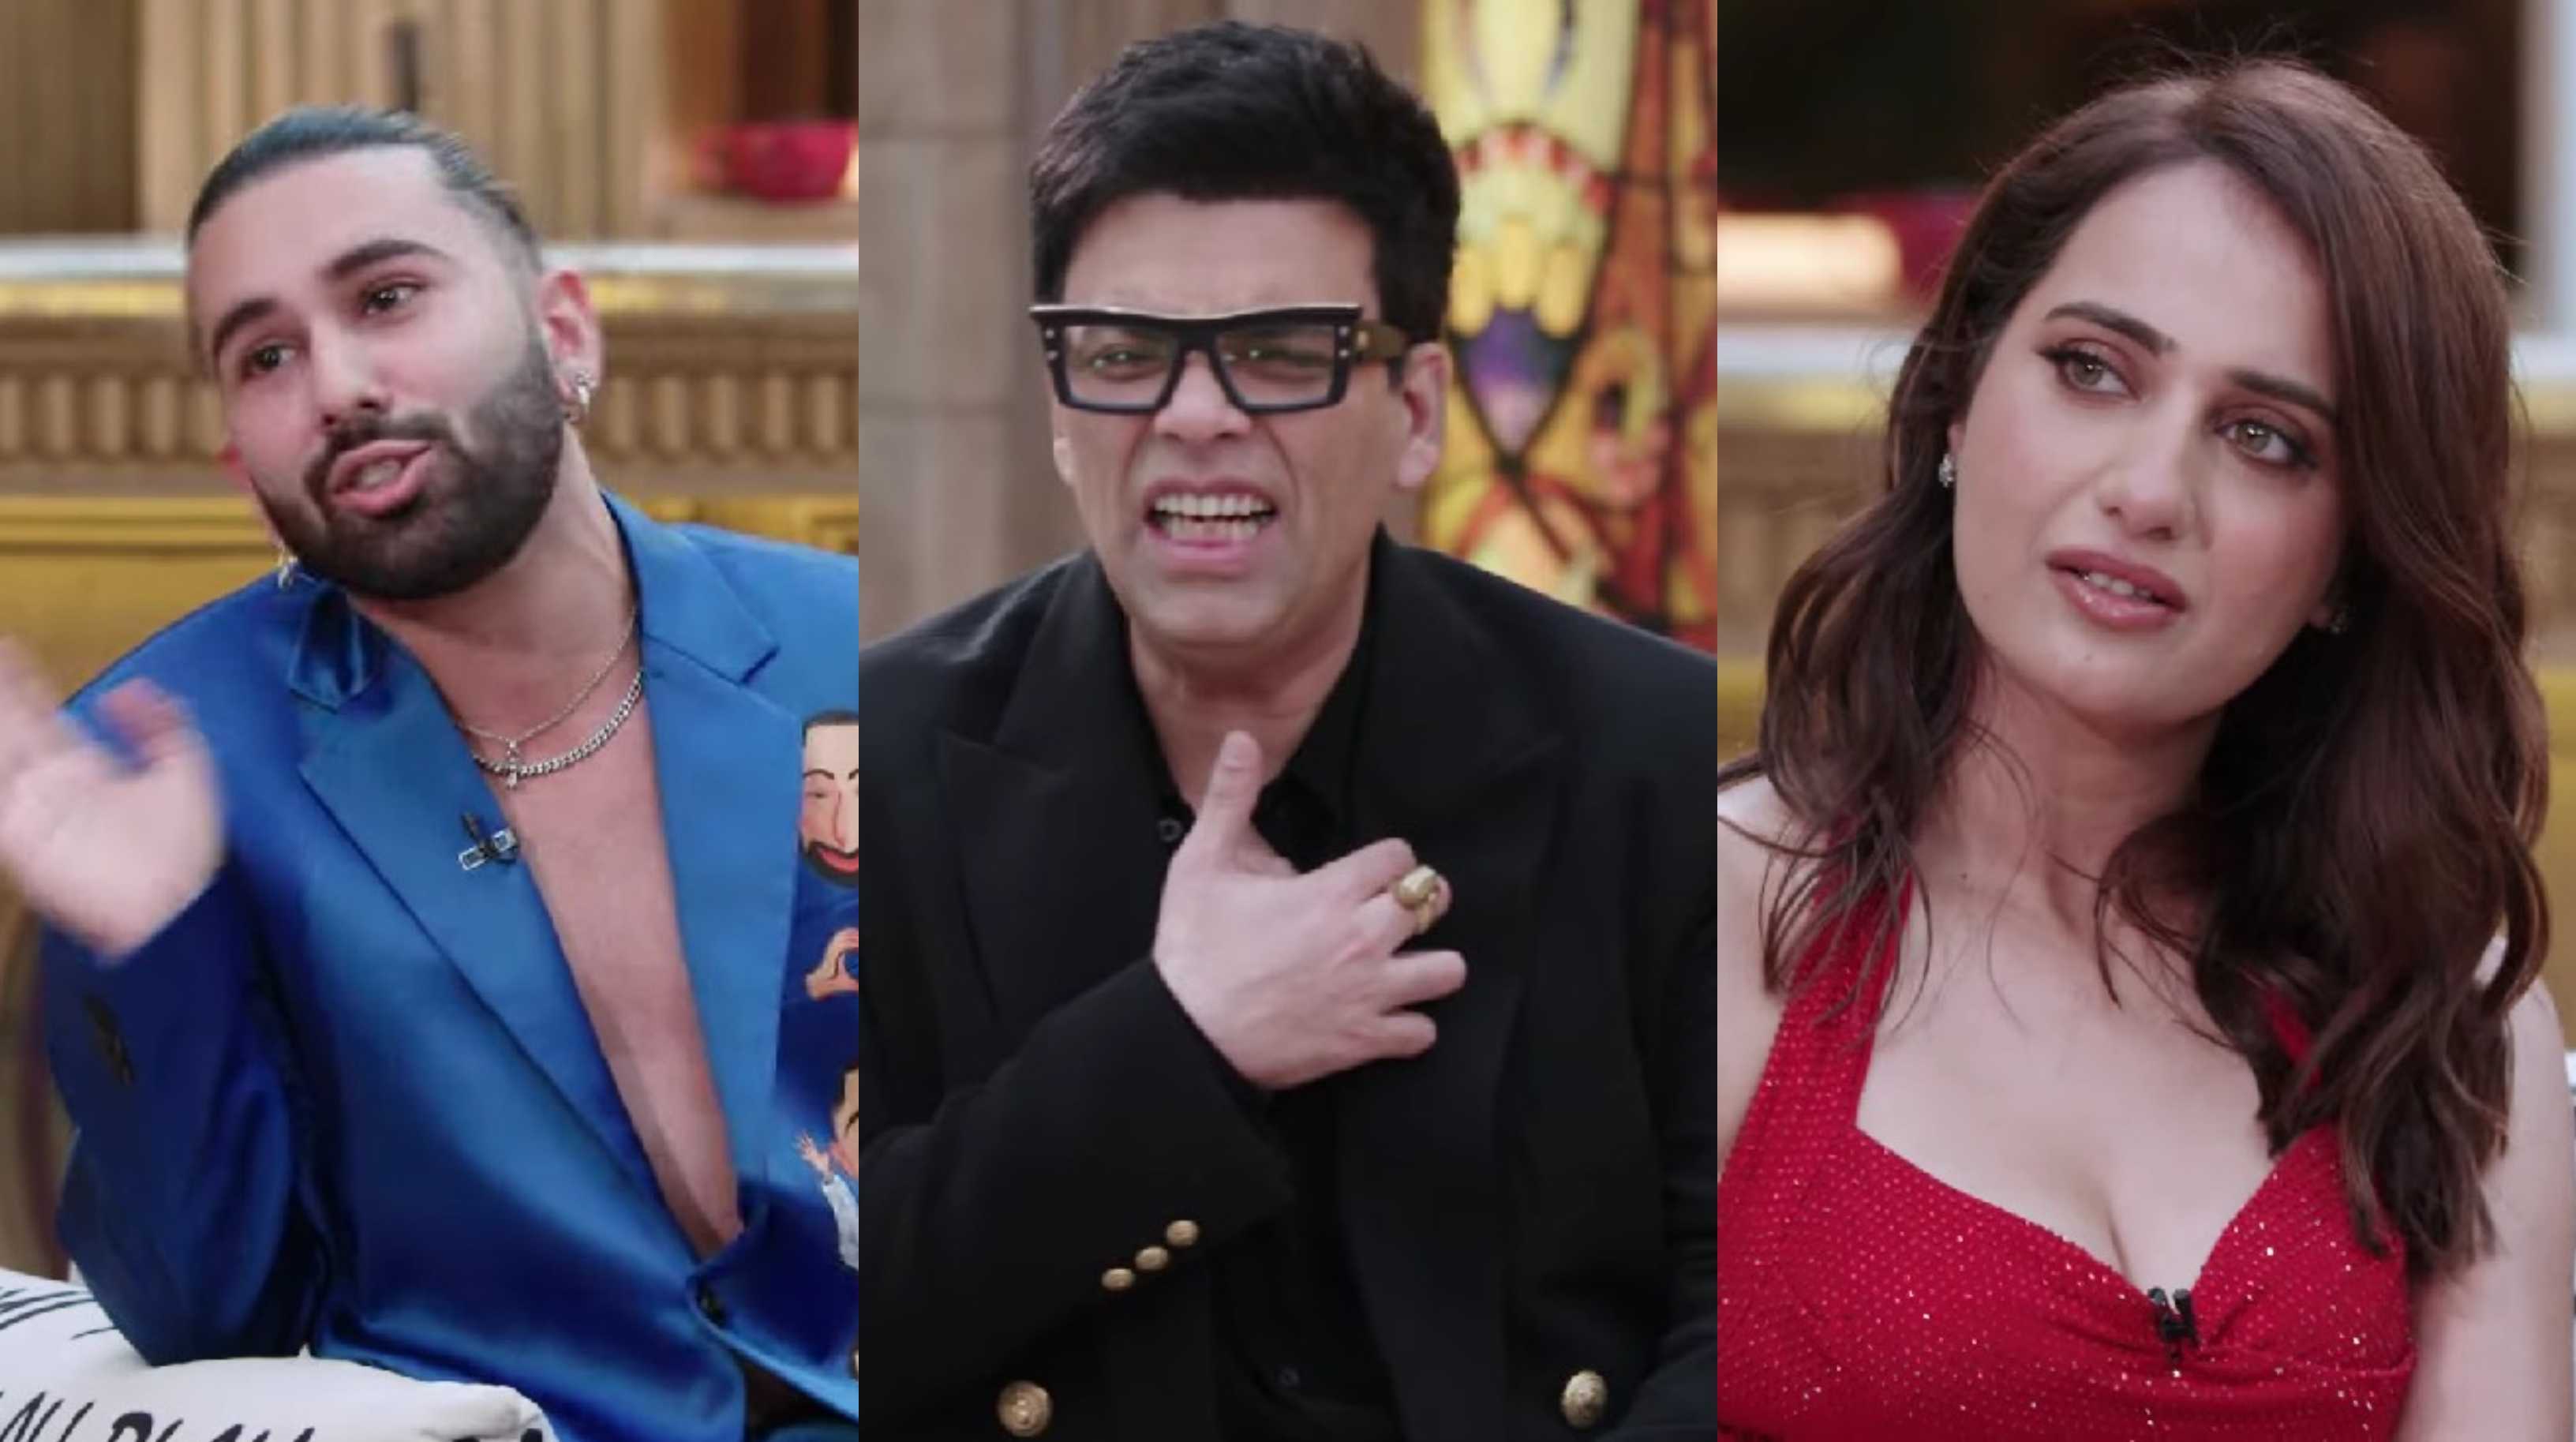 ‘Orry is a cheater’: Karan Johar welcomes influencers to Koffee With Karan 8; Kusha asks about his therapy sessions